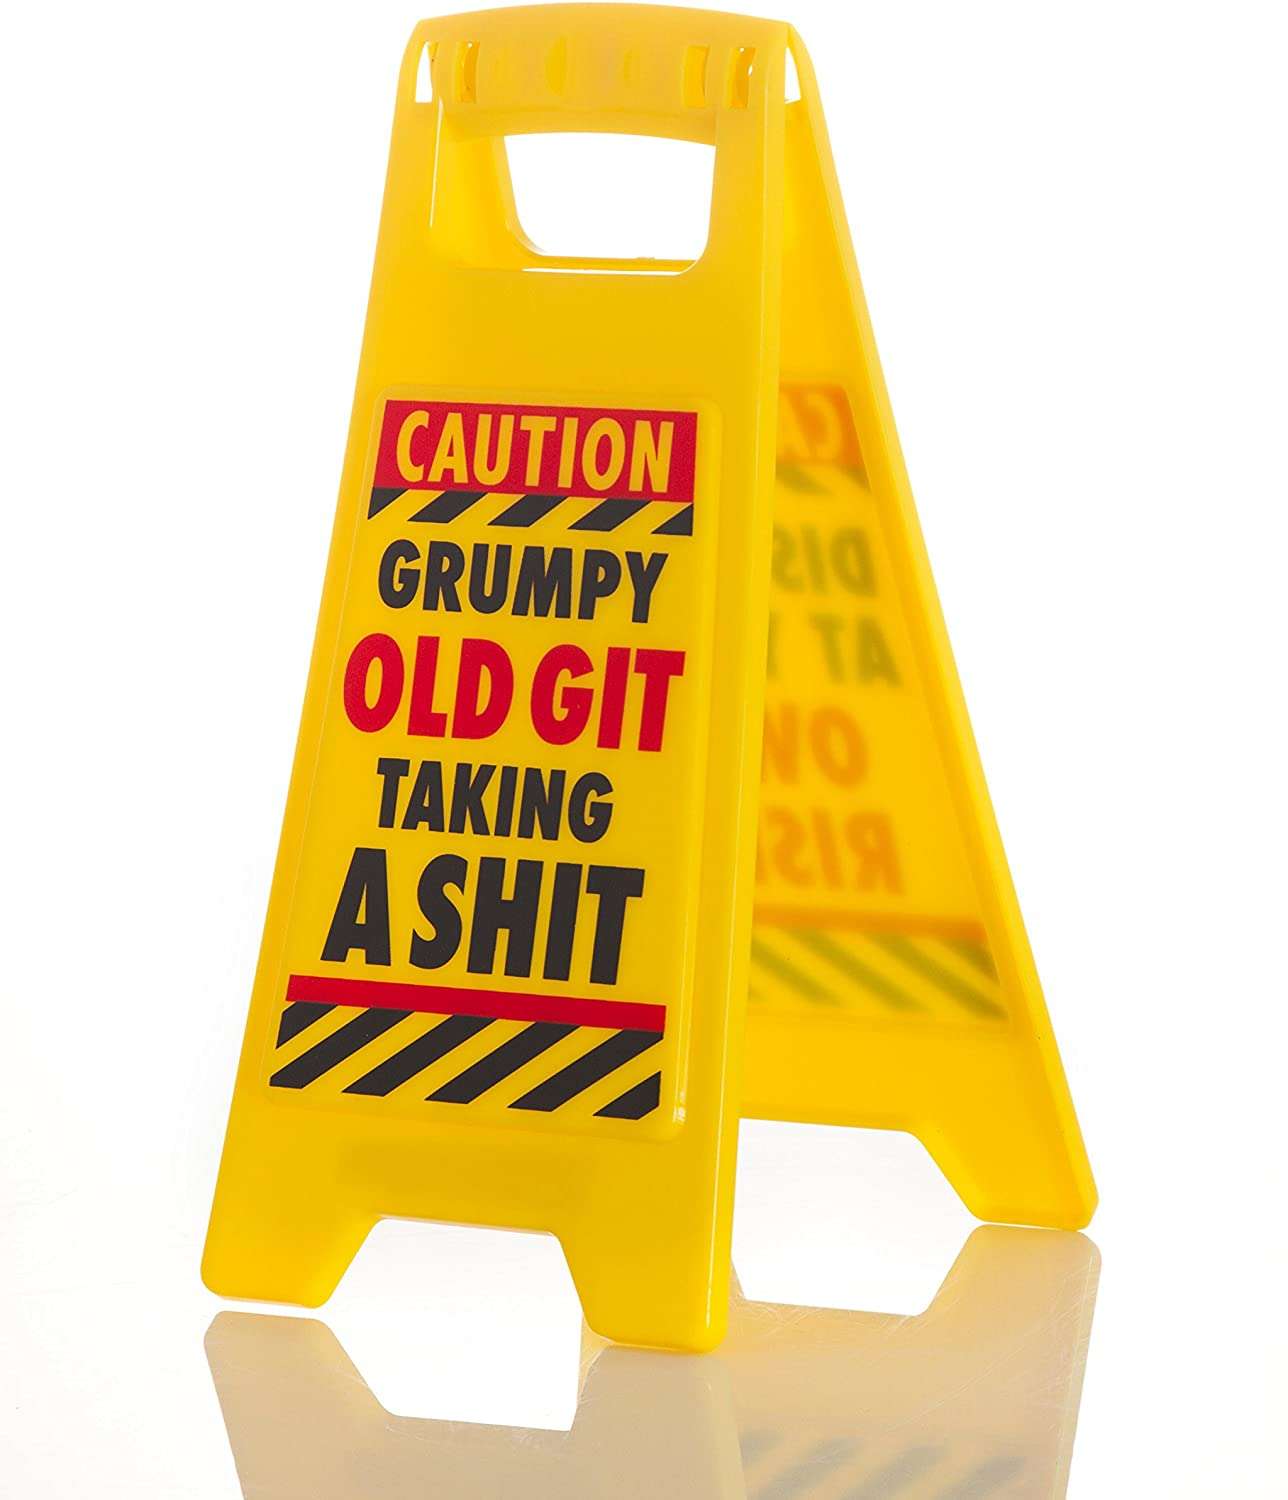 Grumpy Old Gift Warning Sign - Zhivago Gifts